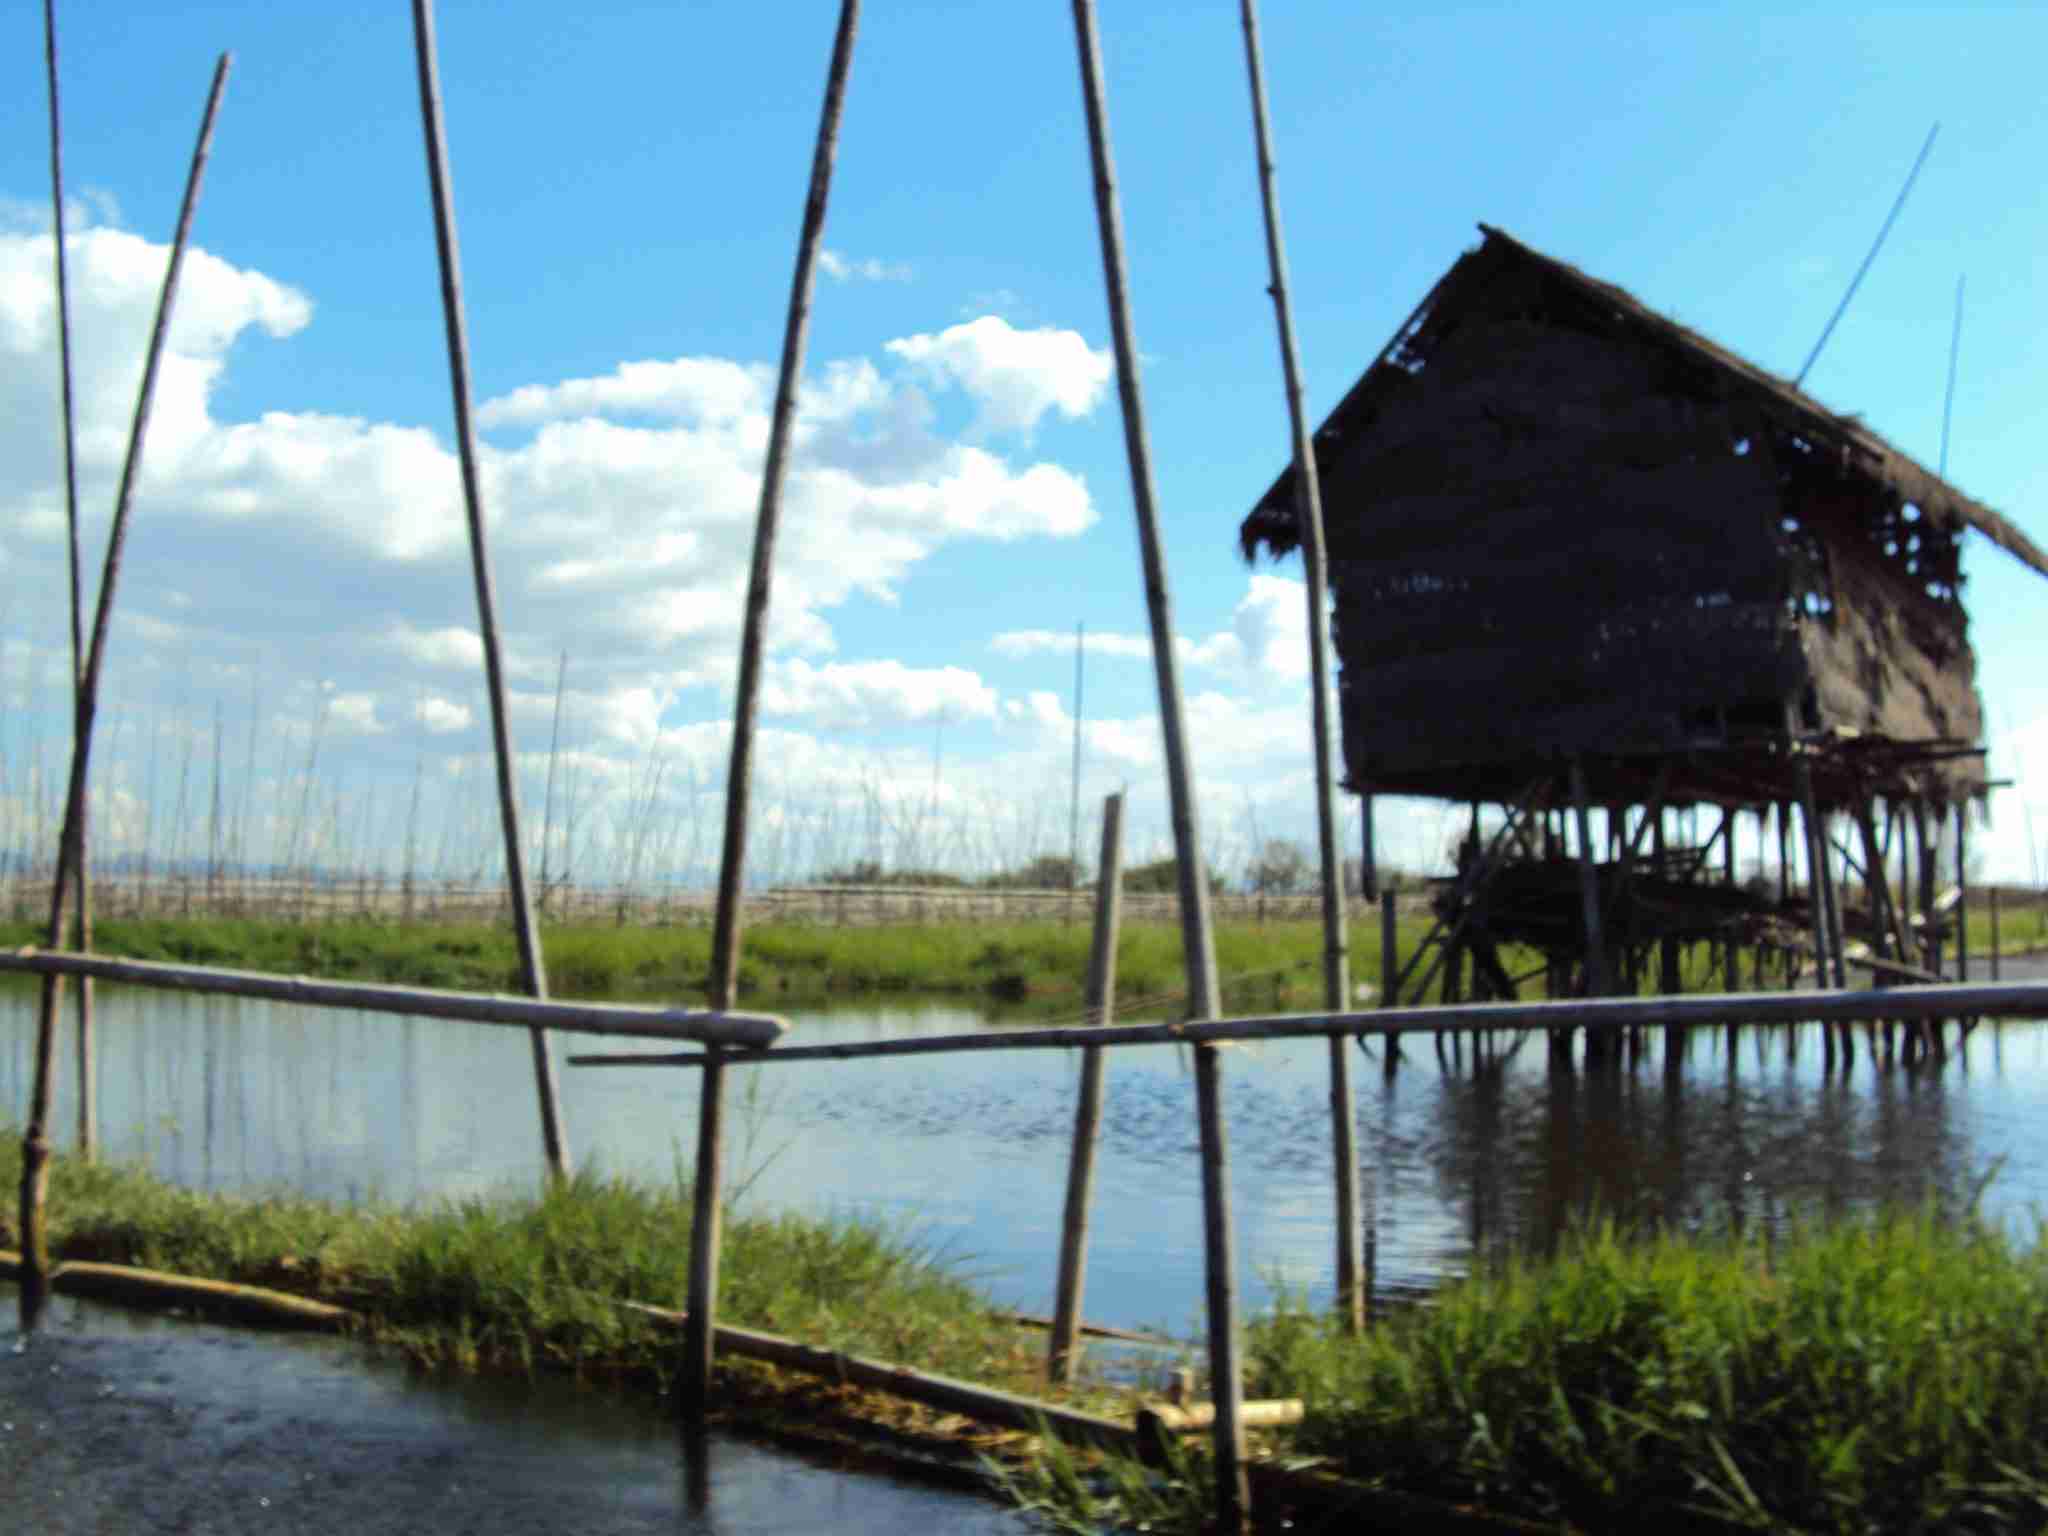 Cabins on stilts in the middle of the Inle lake 